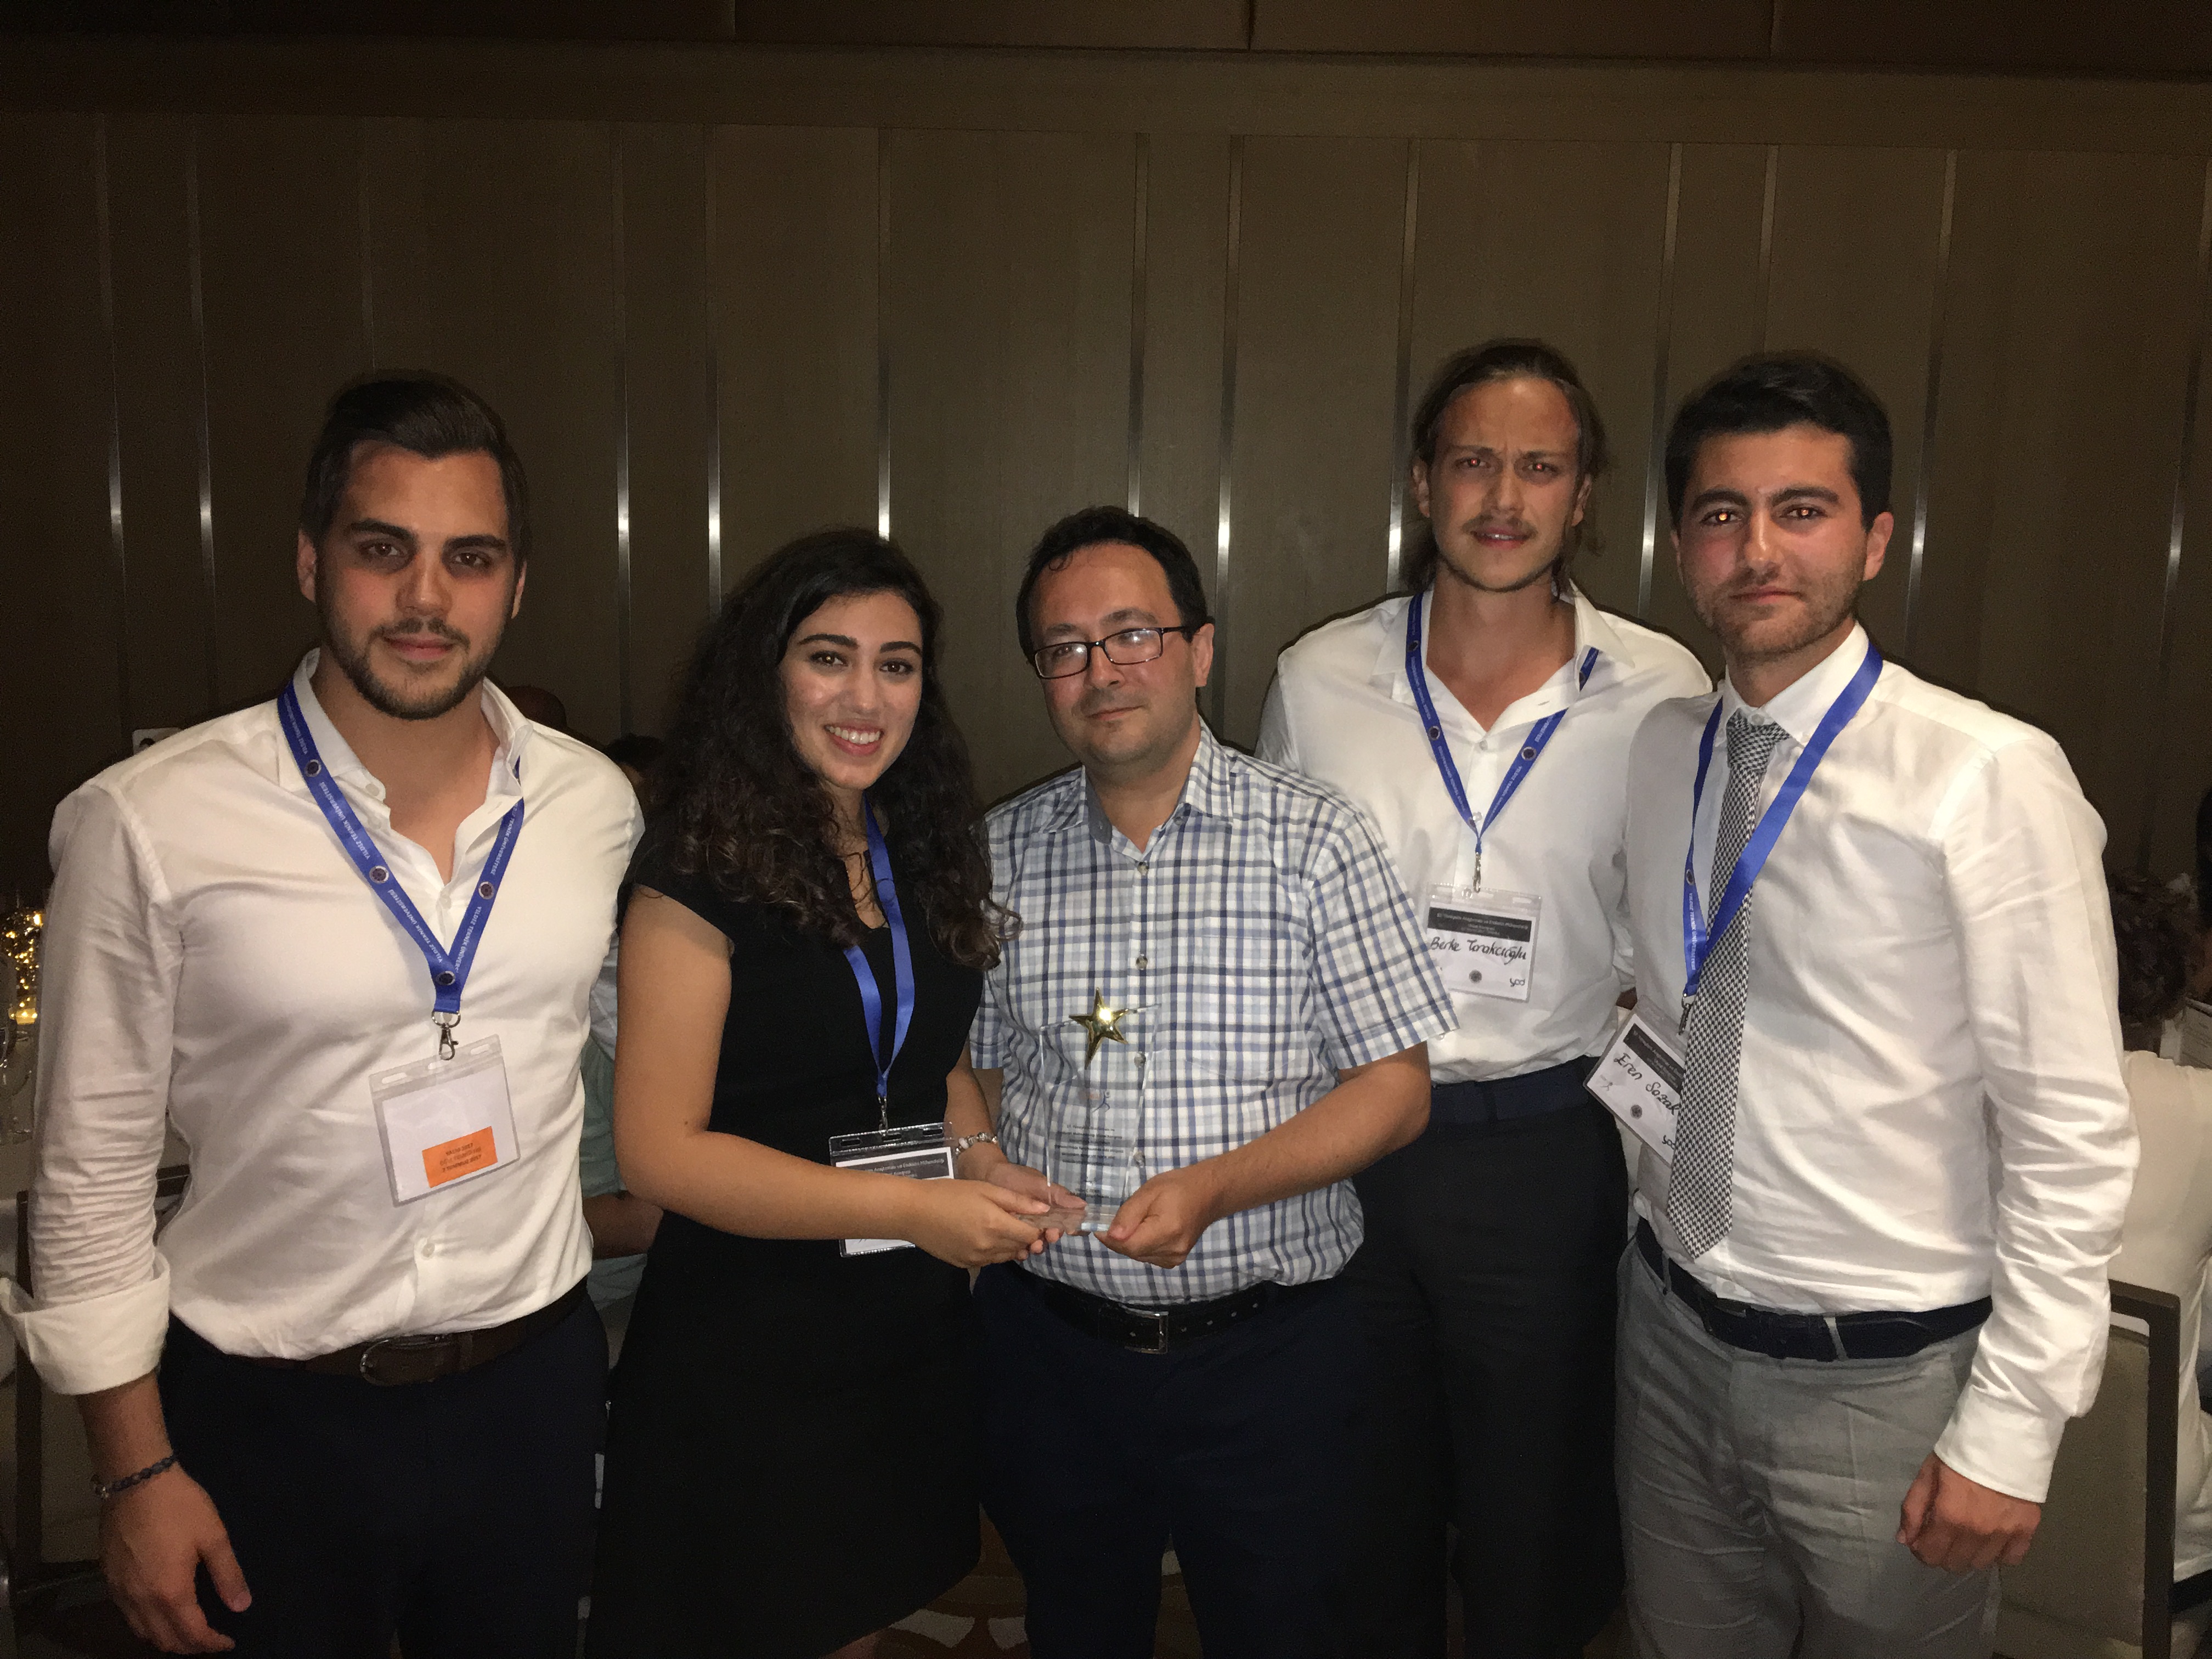 TOBB ETÜ Students Won the 'Operational Research and Industrial Engineering Competition 2017'